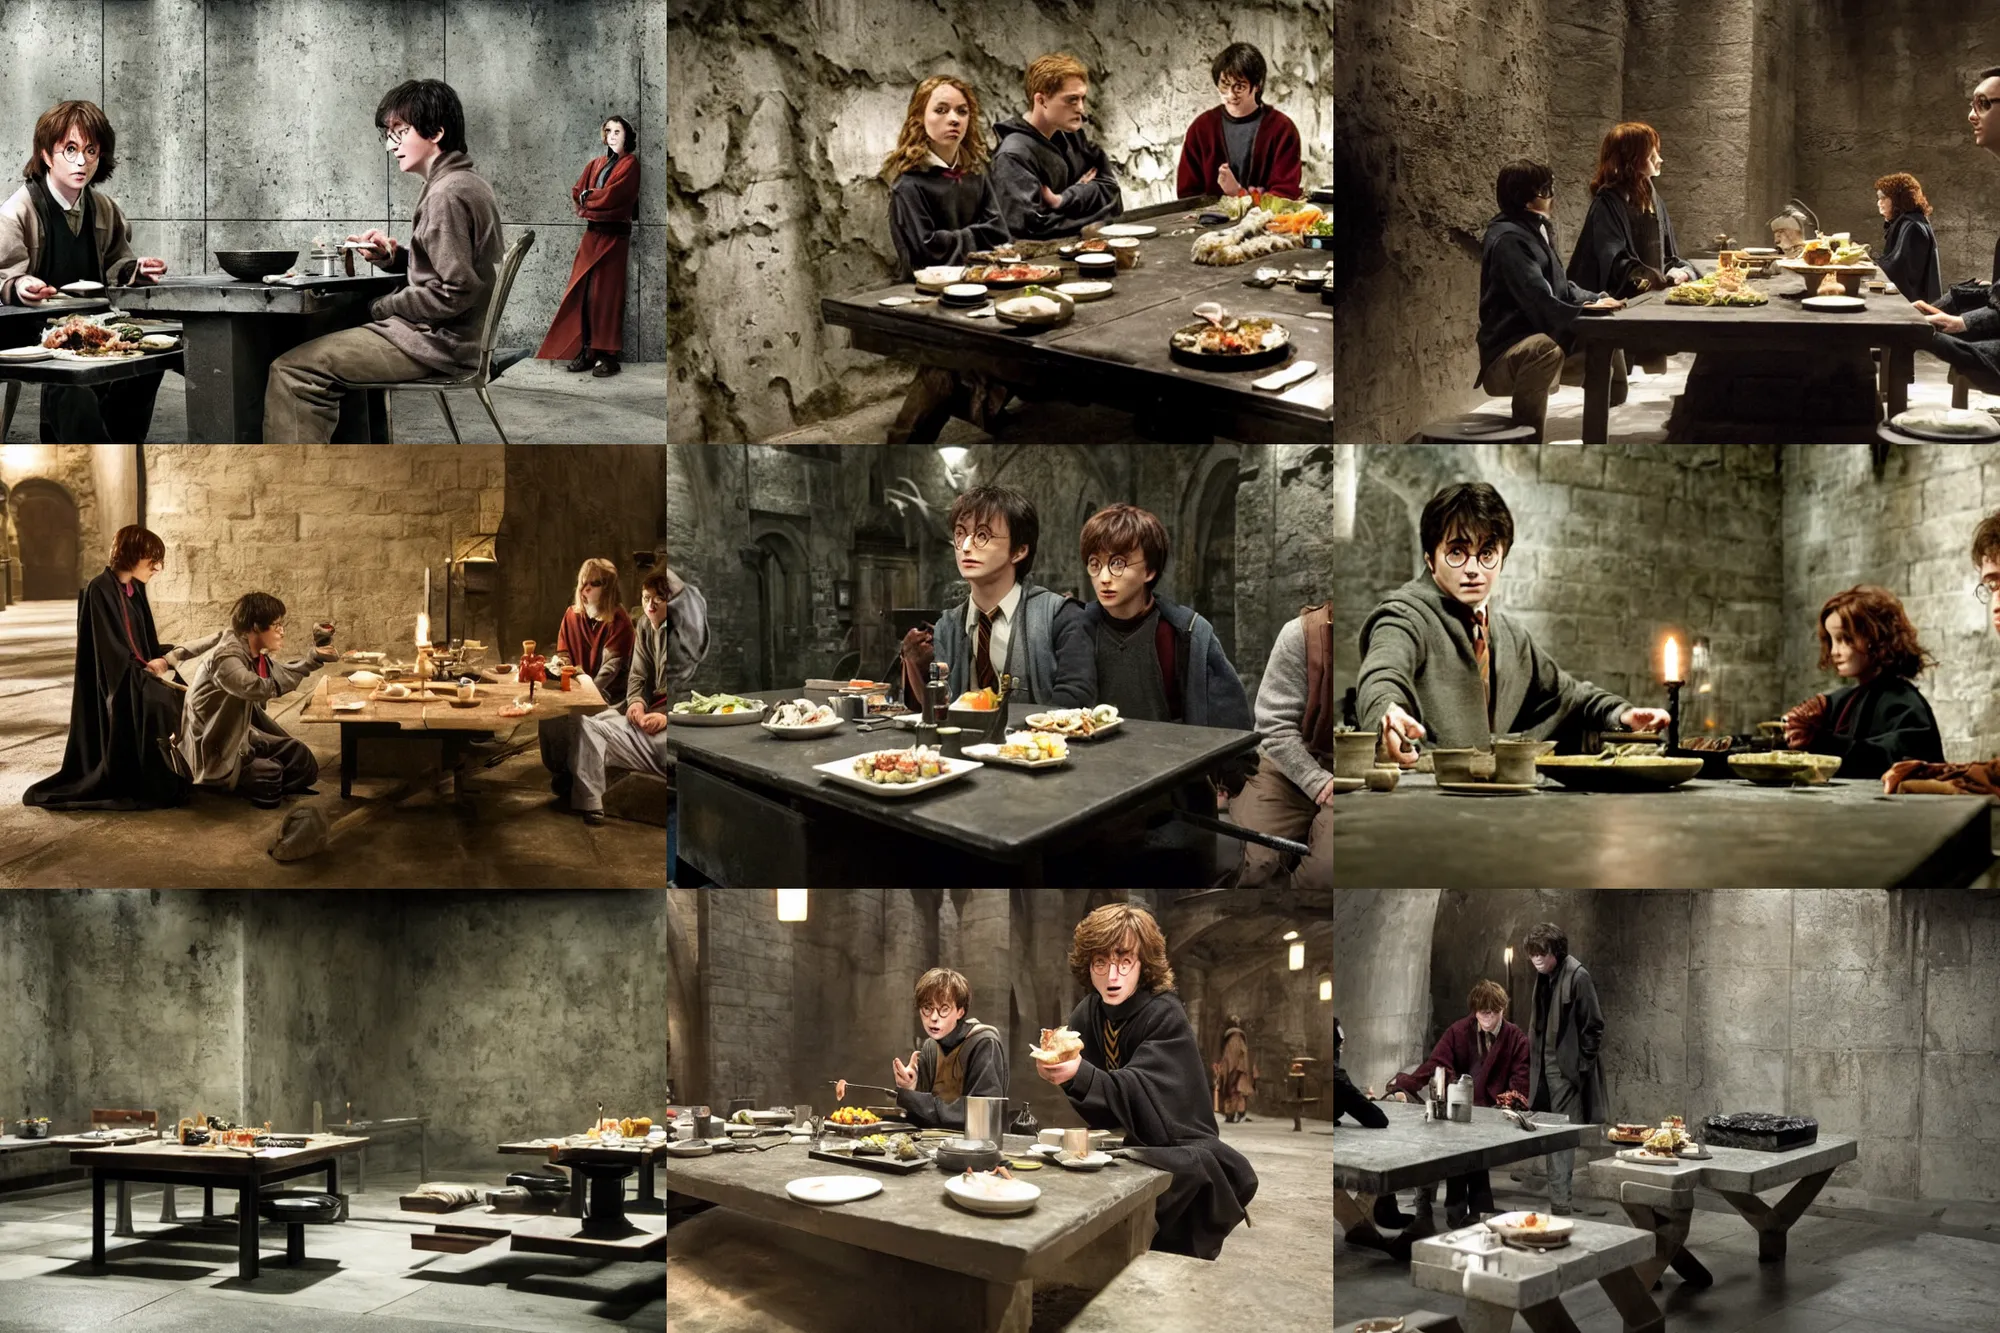 Prompt: Harry potter film, a scene where Harry is eating in a Concrete wall basement, Sushi is placed on a small aluminum table placed in the center, Dark cinematic color tones.